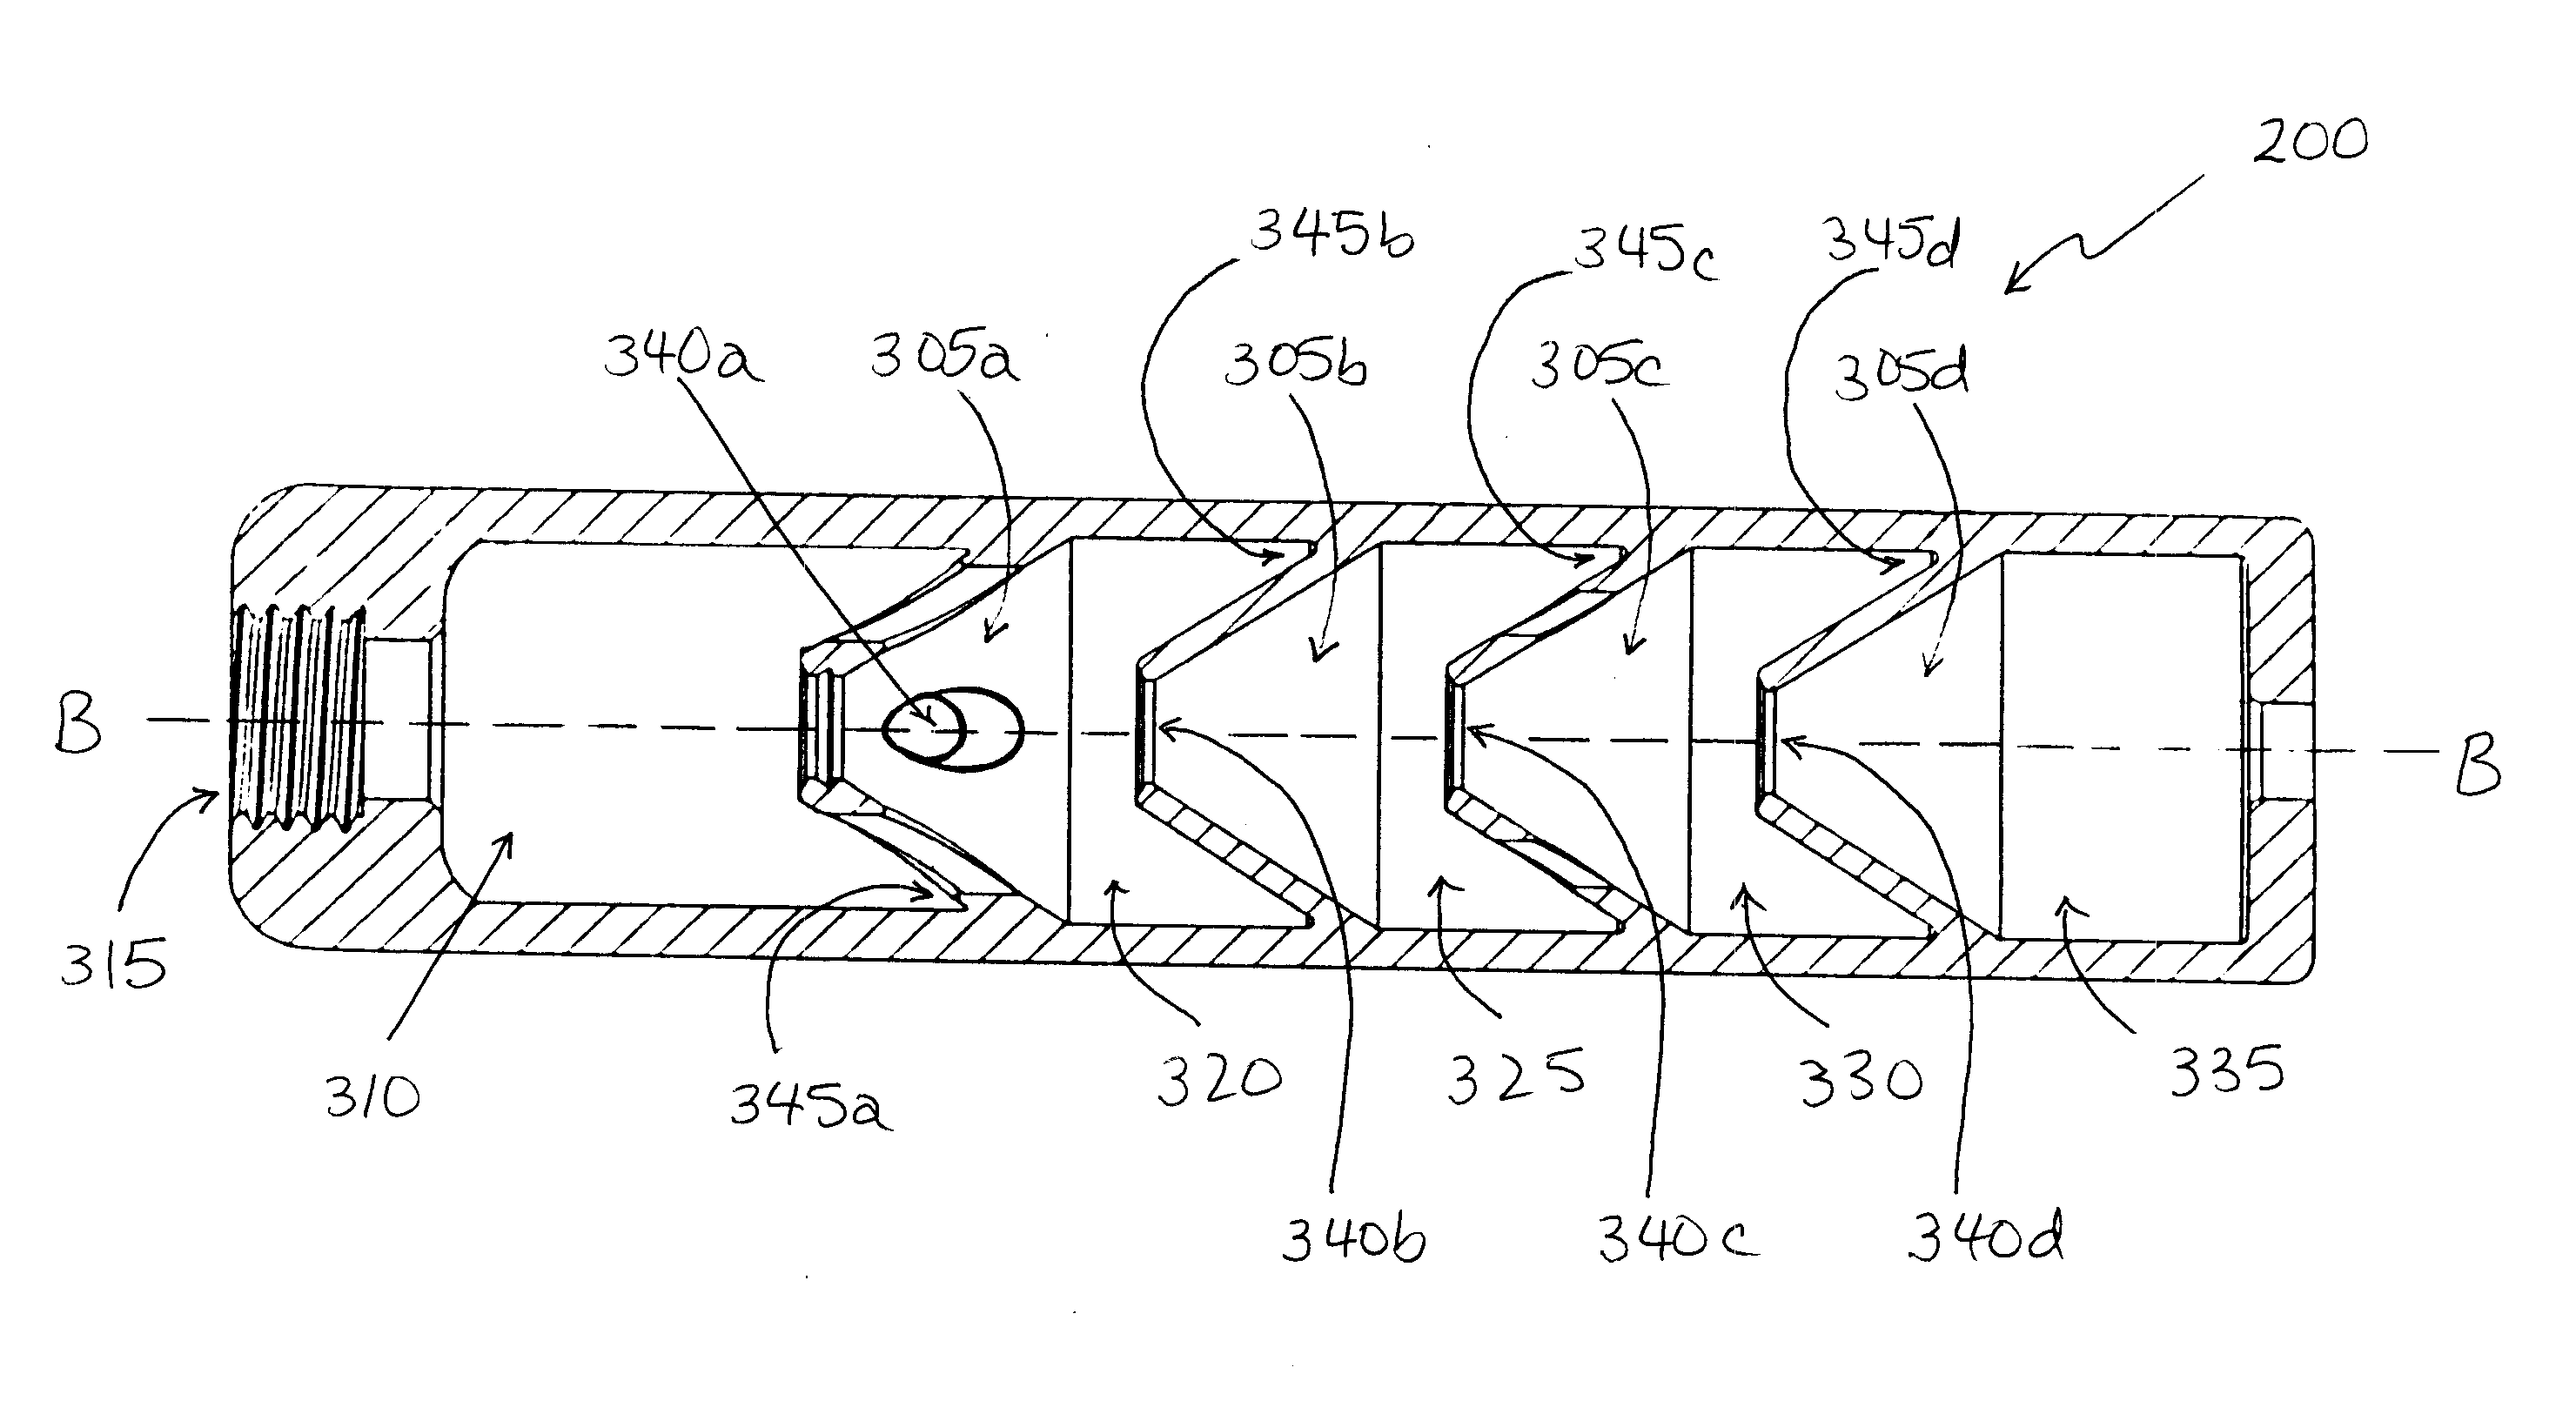 Monolithic noise suppression device for firearm